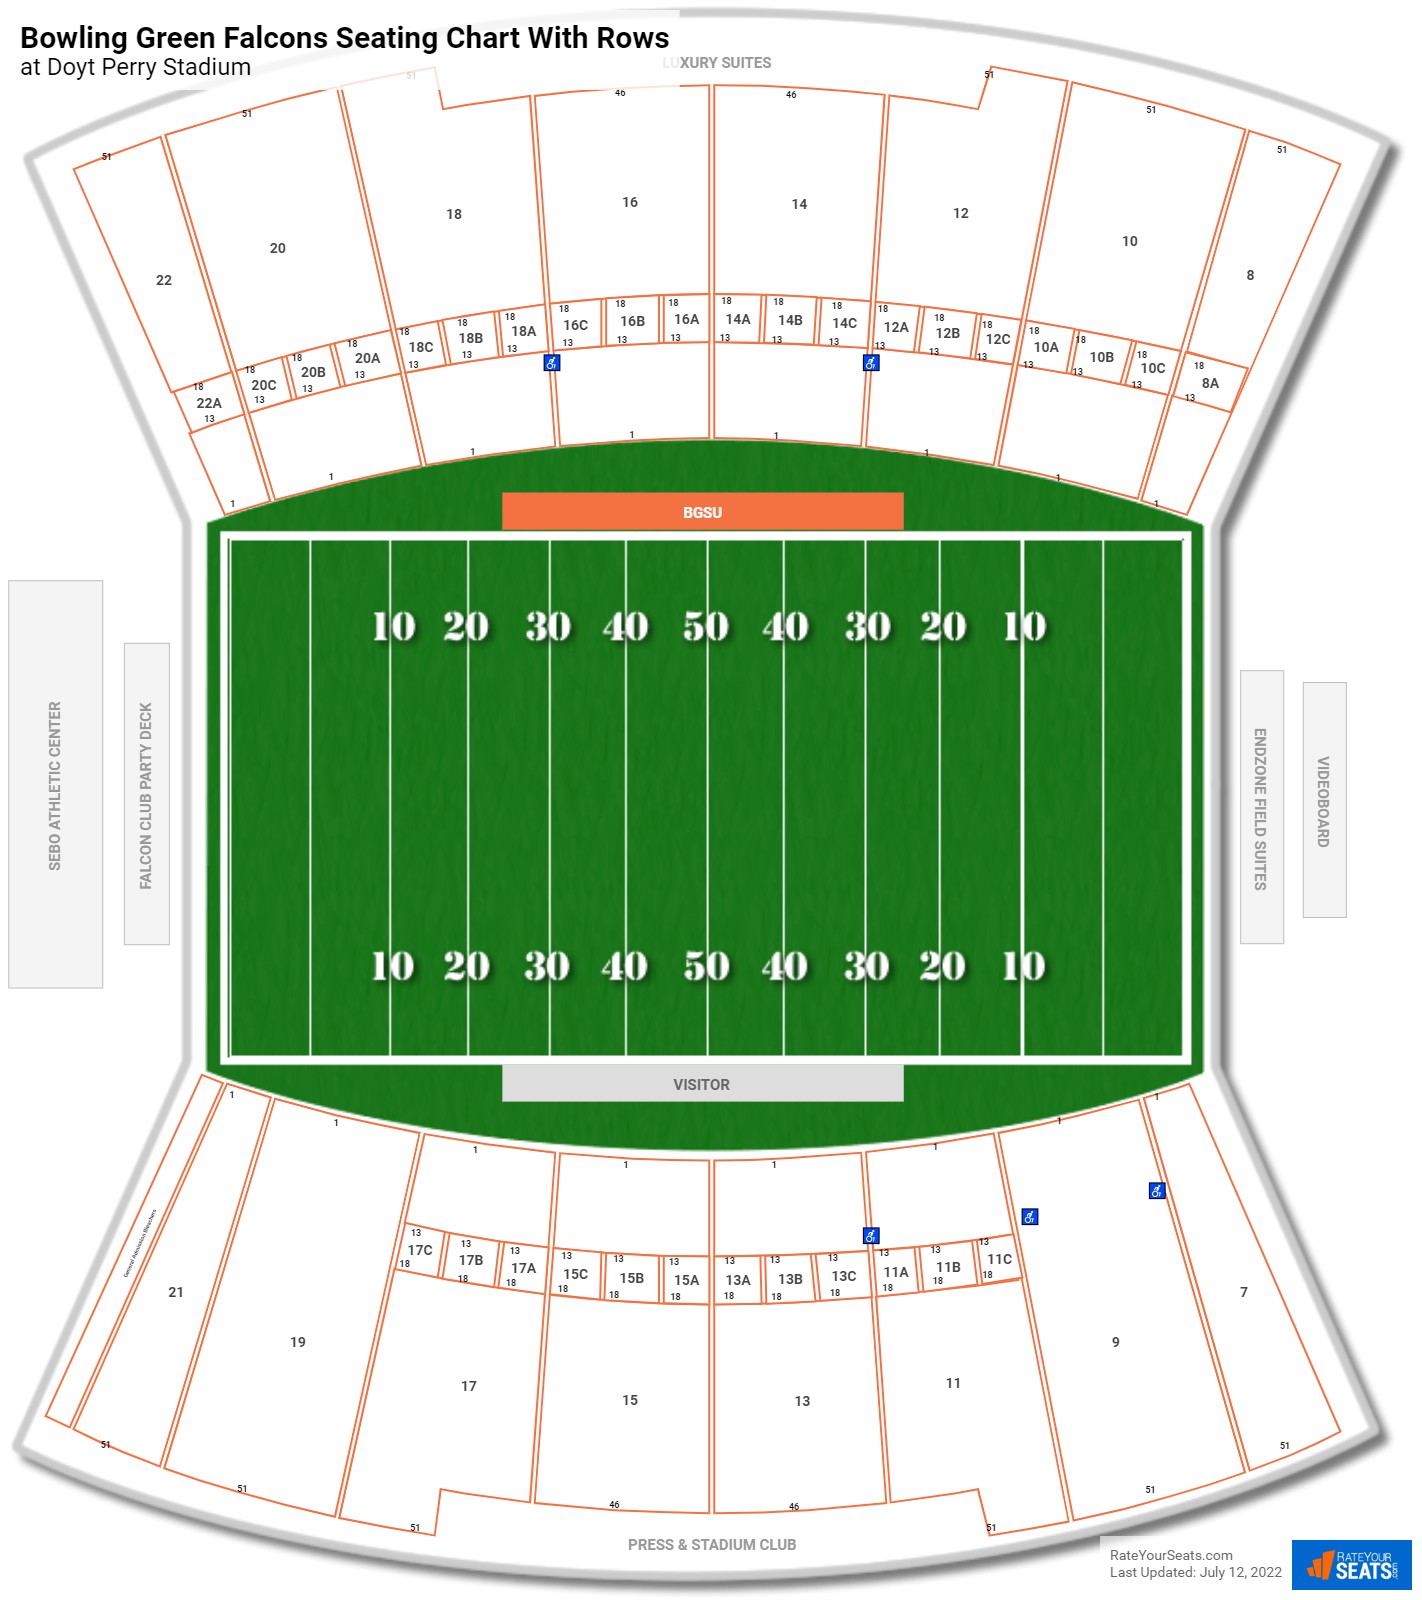 Doyt Perry Stadium seating chart with row numbers